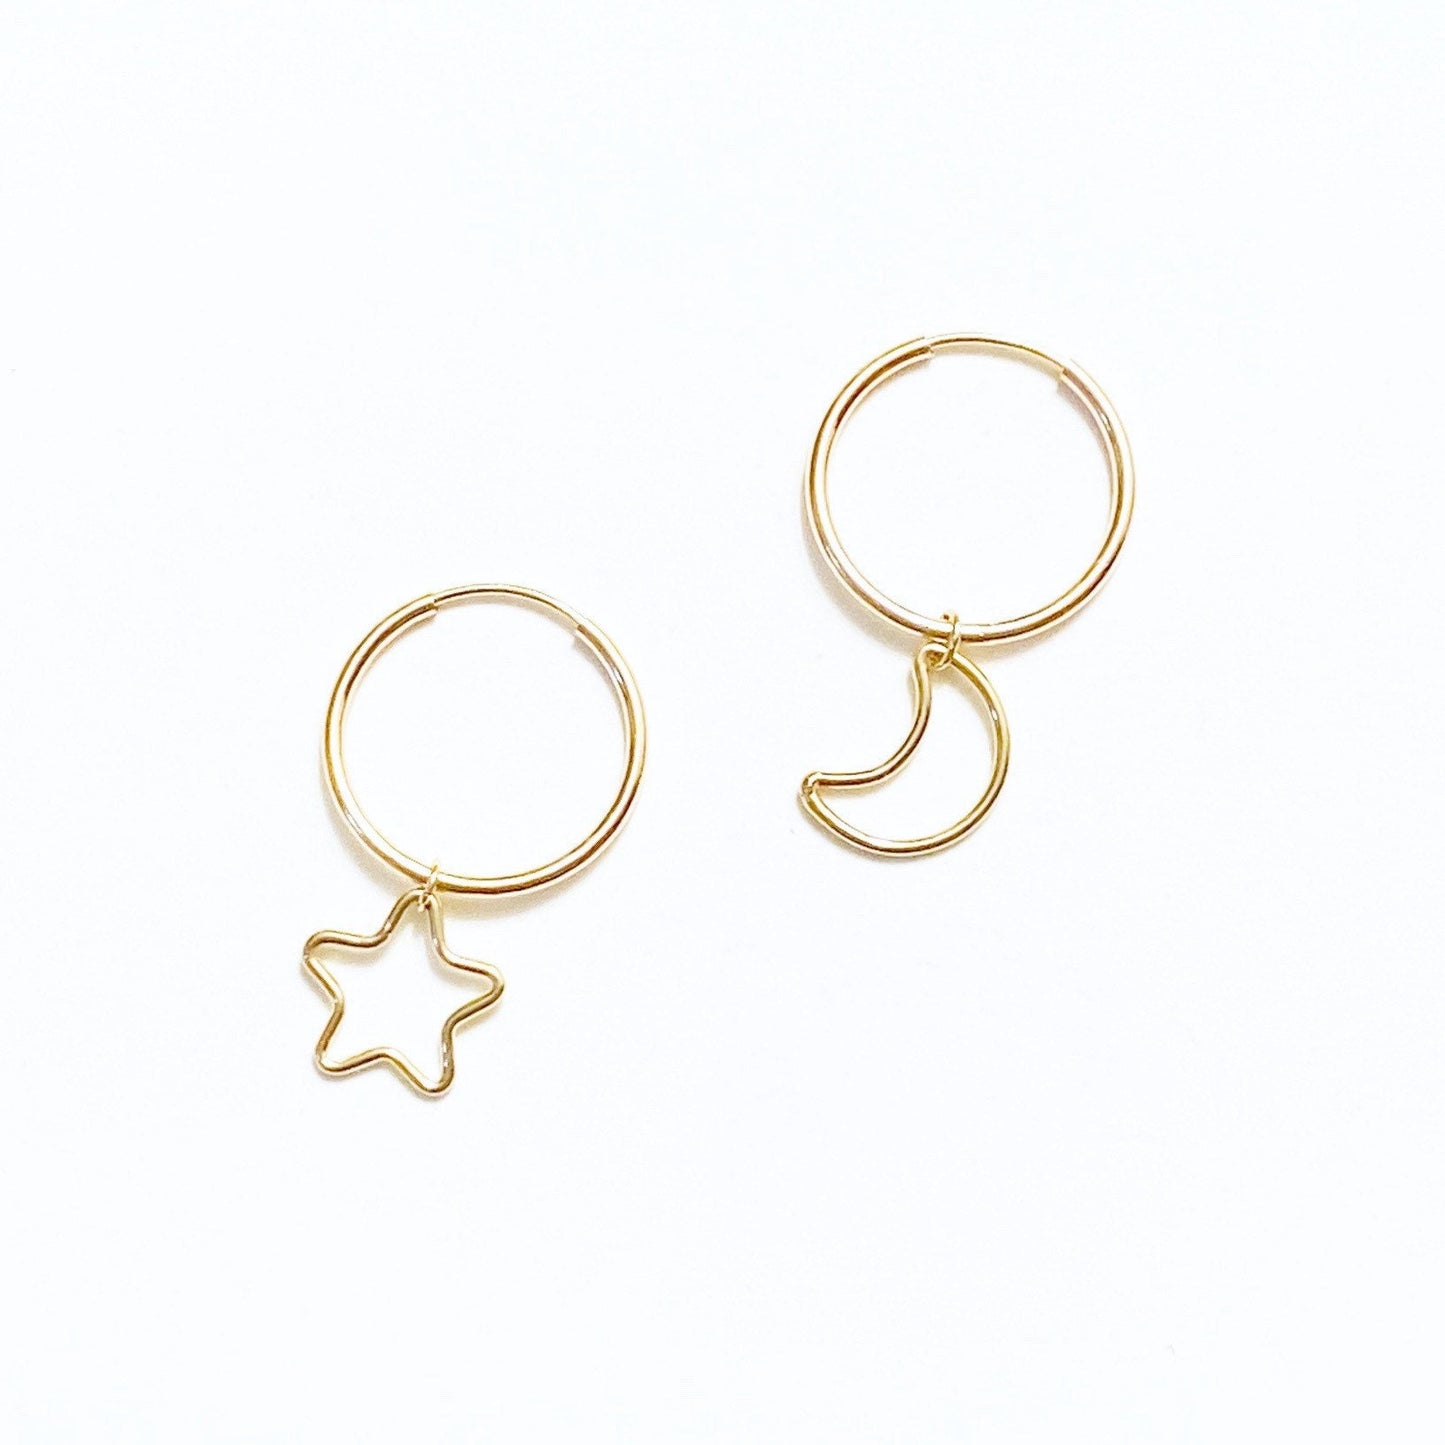 Maddy star and moon hoops (heart hoops also available)